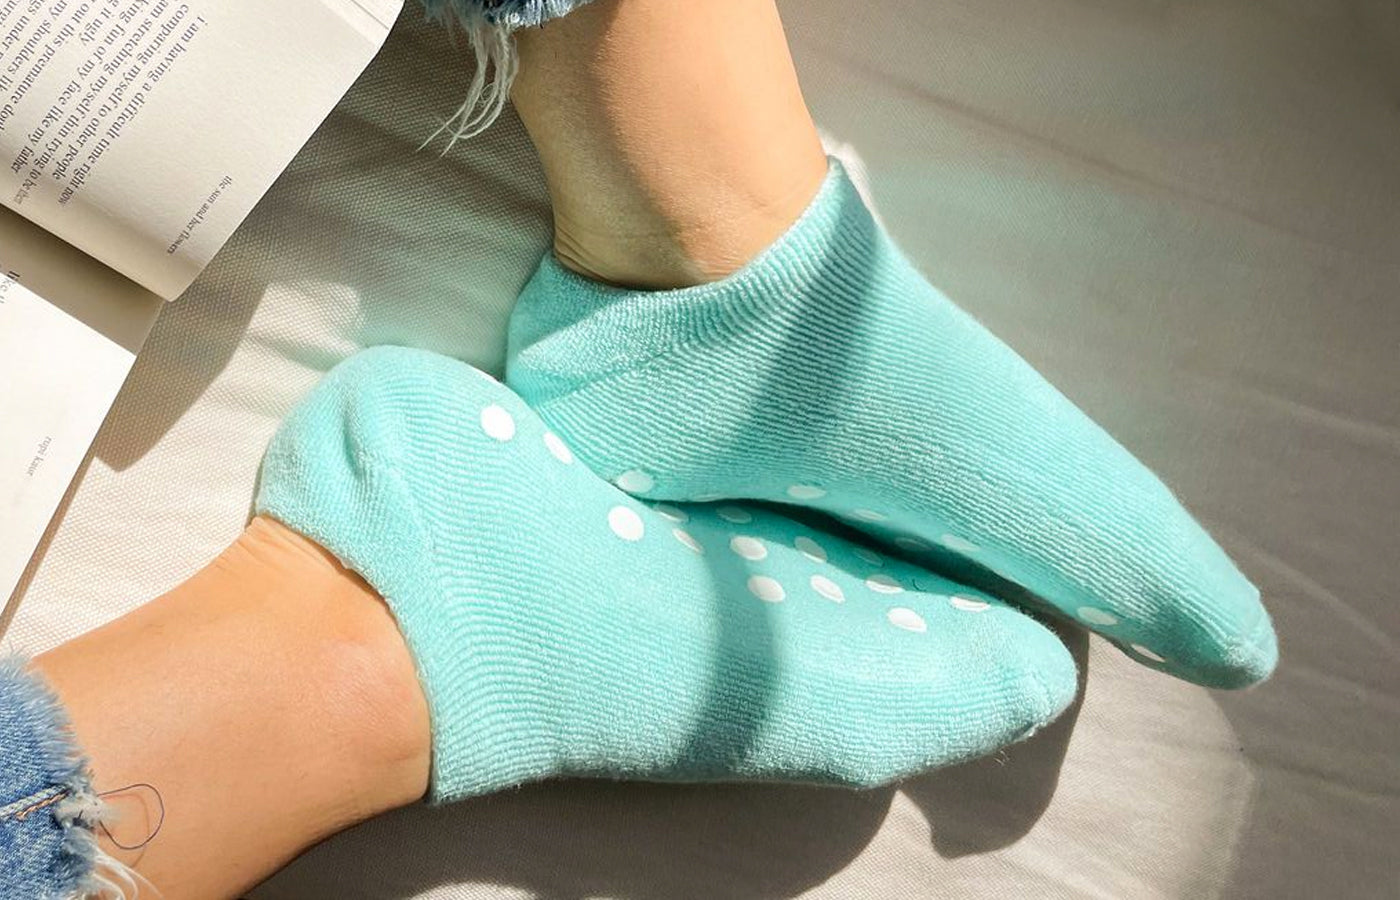  Therapeutic Invisible GEL TOE SOCKS : Beauty & Personal Care